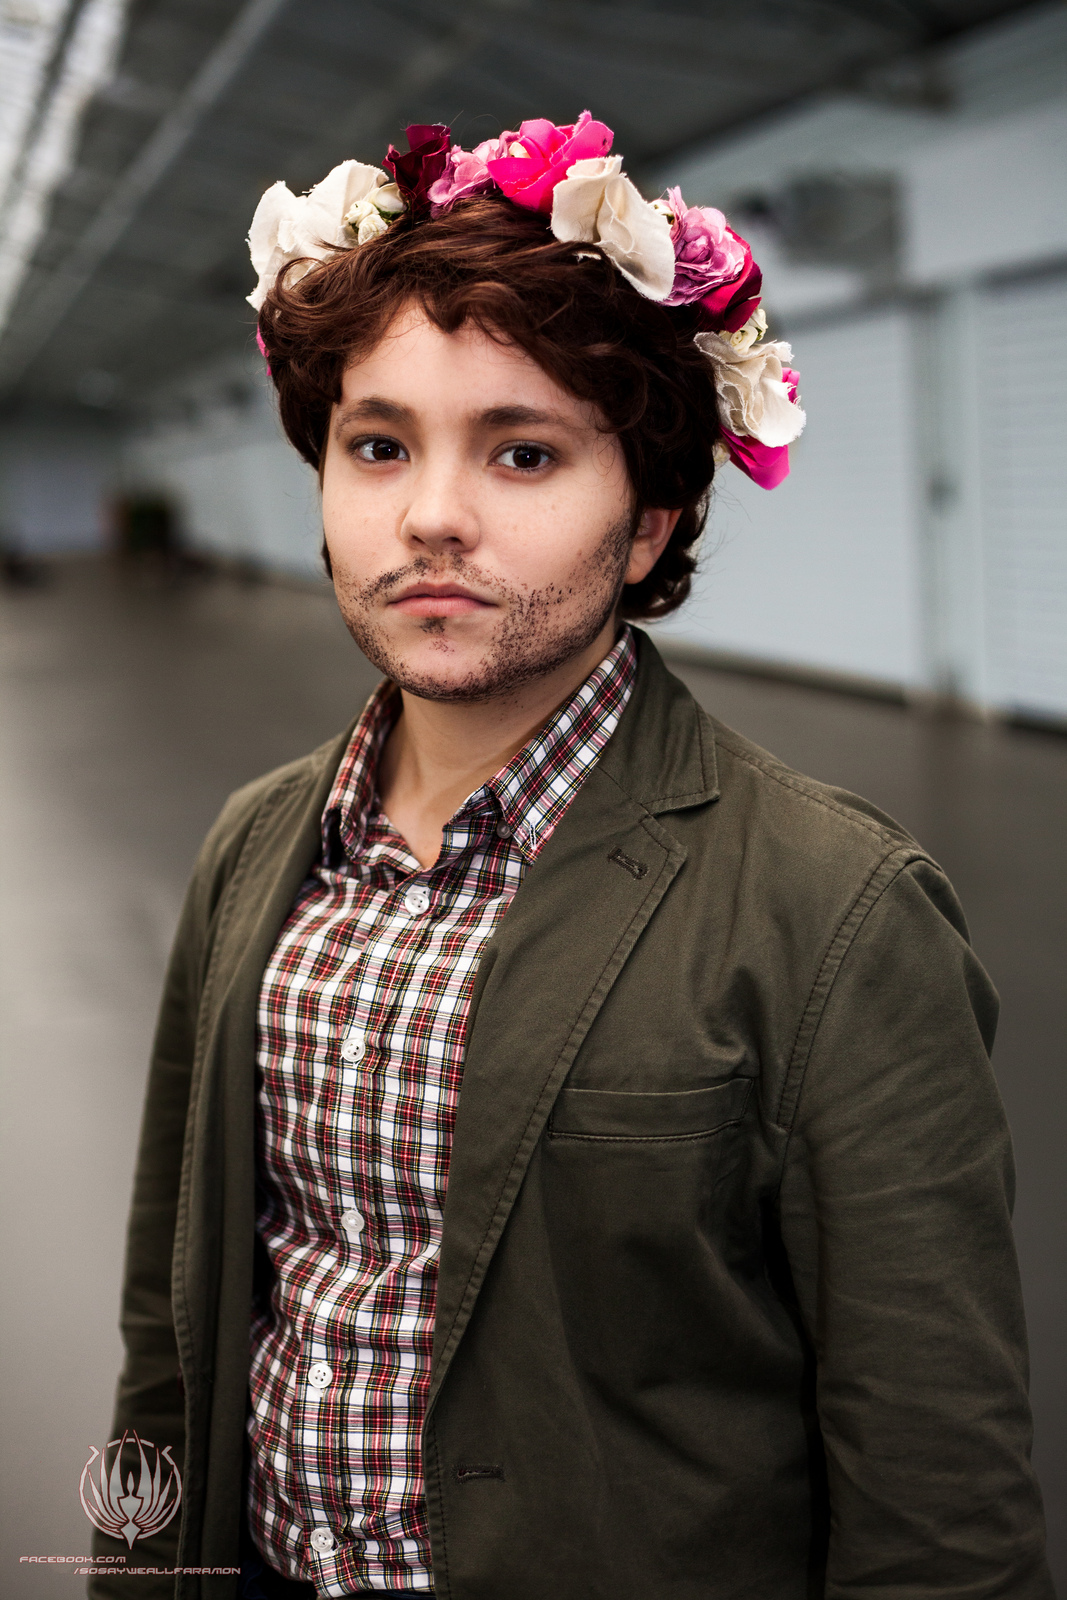 swiggity_swag___will_graham_and_his_rose_crown_by_faramon-d6q0t6n